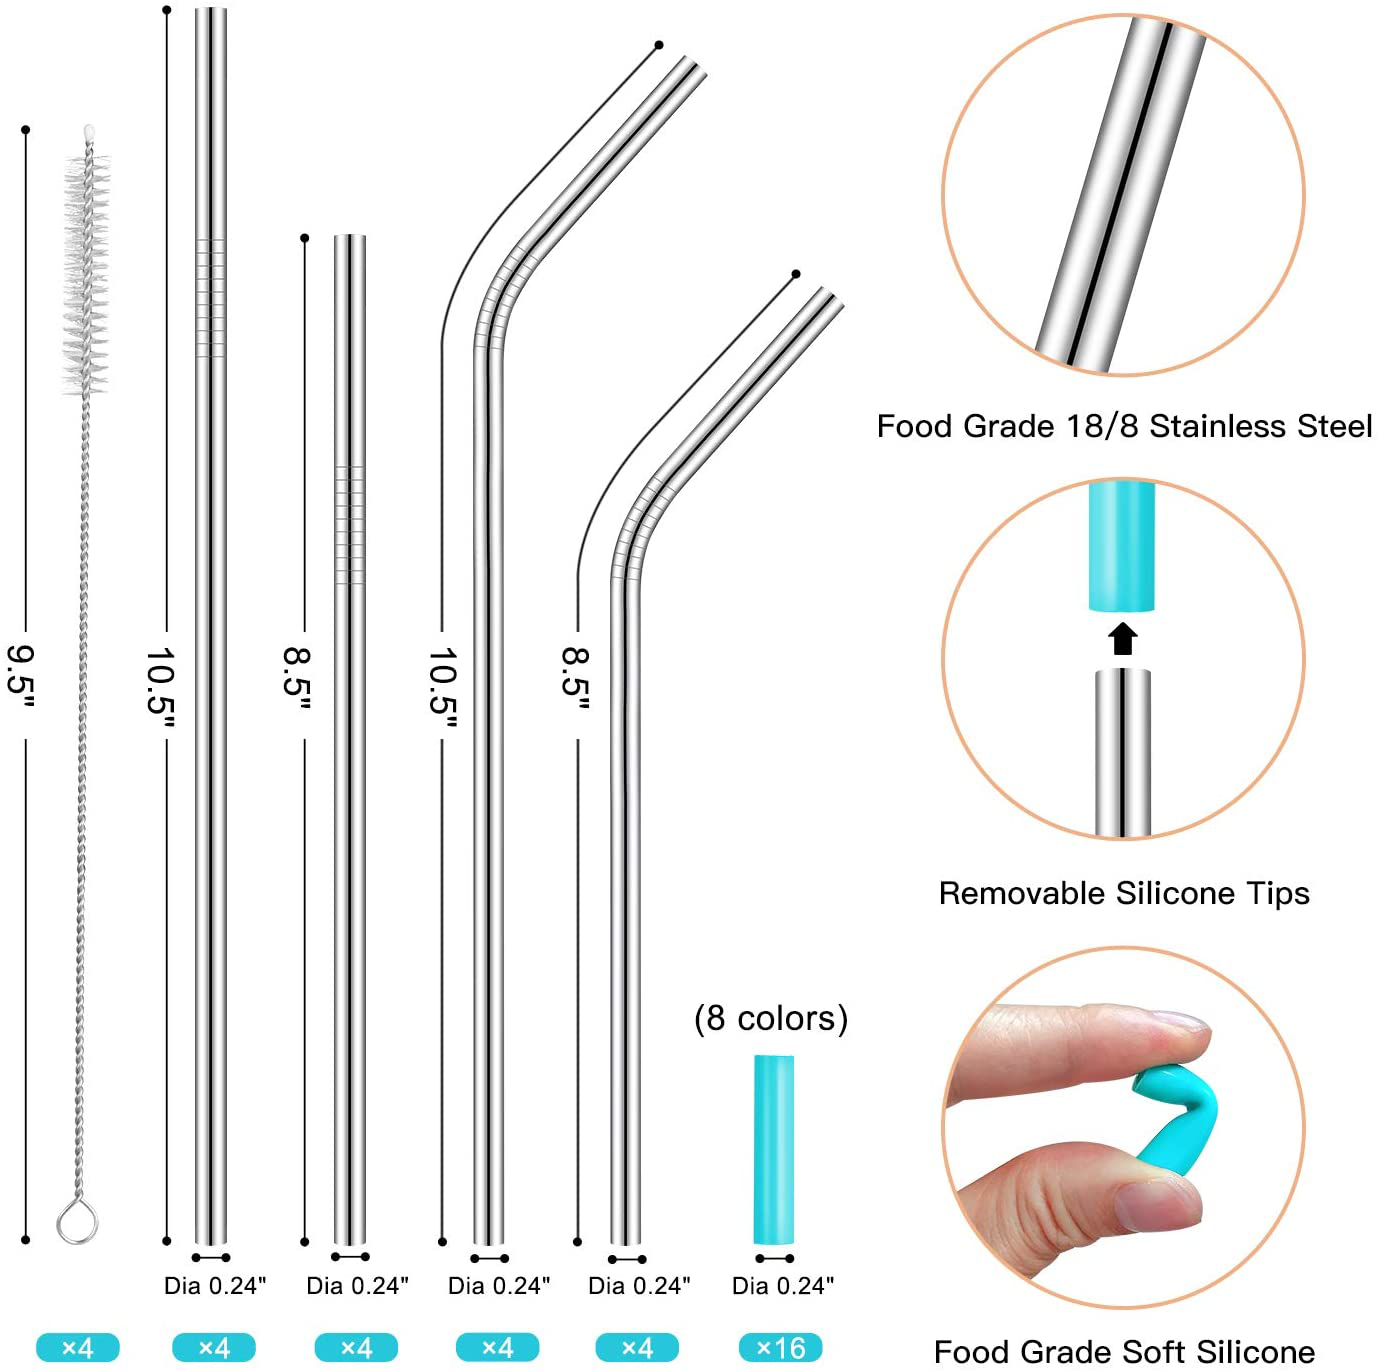 StrawExpert 16 Pack Rainbow Color Reusable Metal Straws with Silicone Tip & Travel Case & Cleaning Brush,Colored Long Stainless Steel Straws Drinking Straw for 20 and 30 oz Tumbler